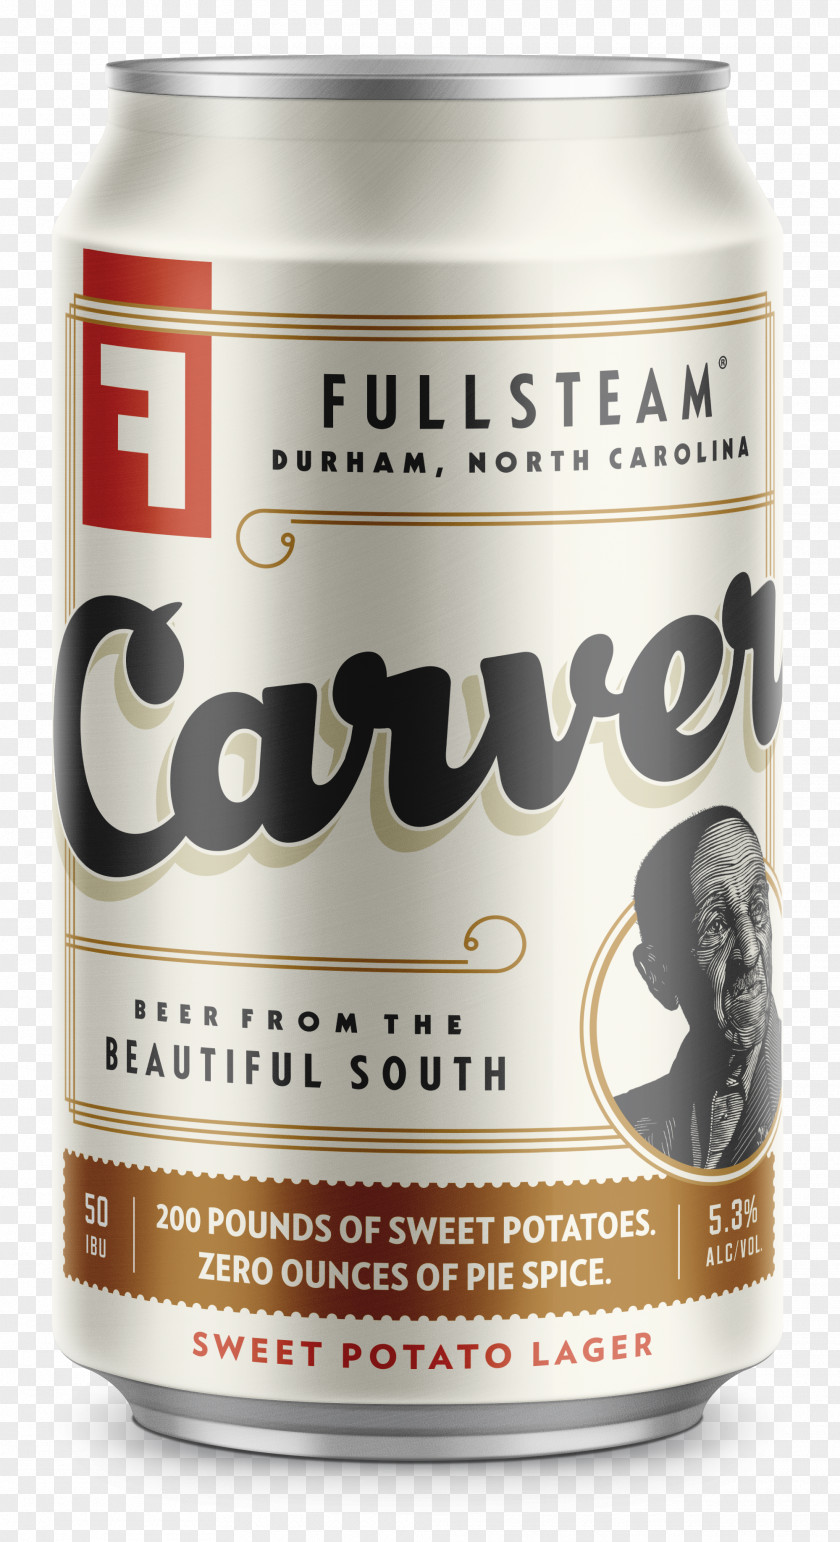 Beer Cans Fullsteam Brewery Lager Alcoholic Drink Cackalacky Classic Condiment PNG